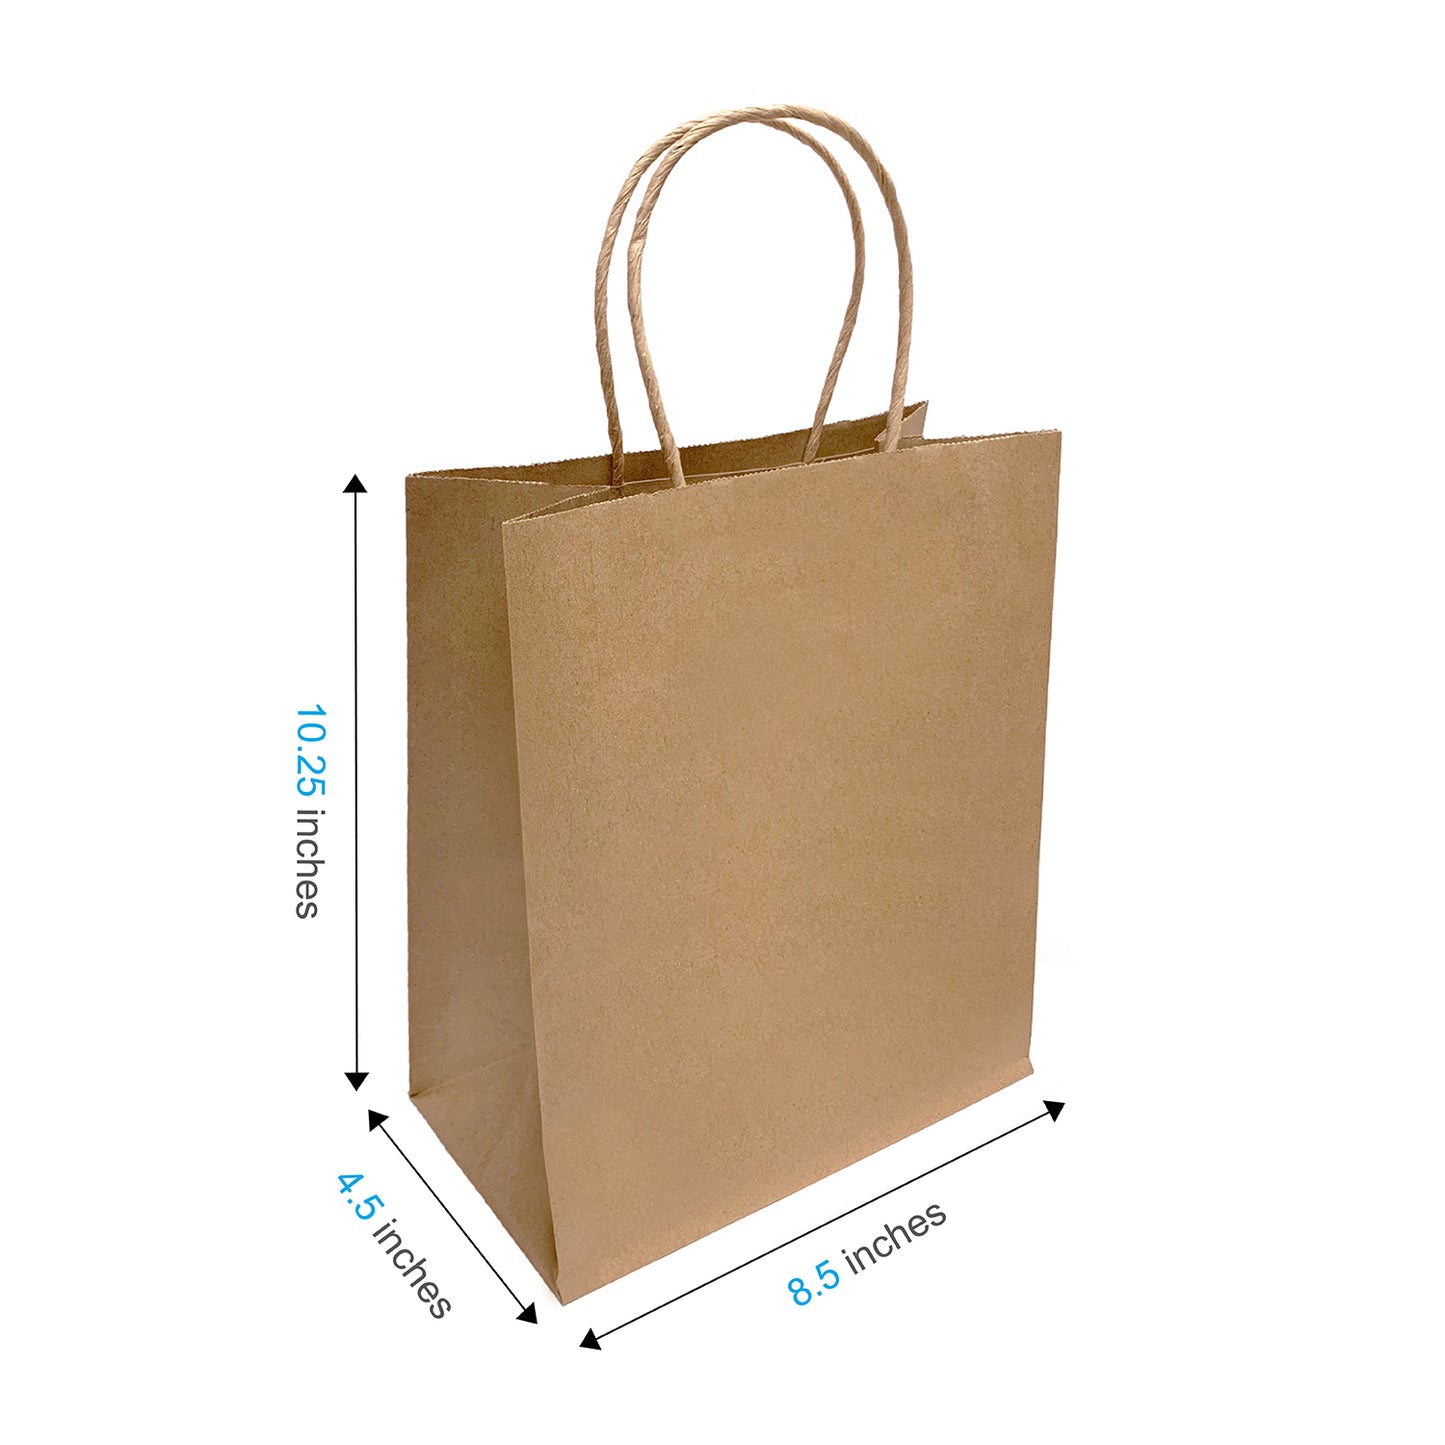 250 Pcs, Cub, 8.5x4.5x10.25 inches, Kraft Paper Bags, with Twisted Handle